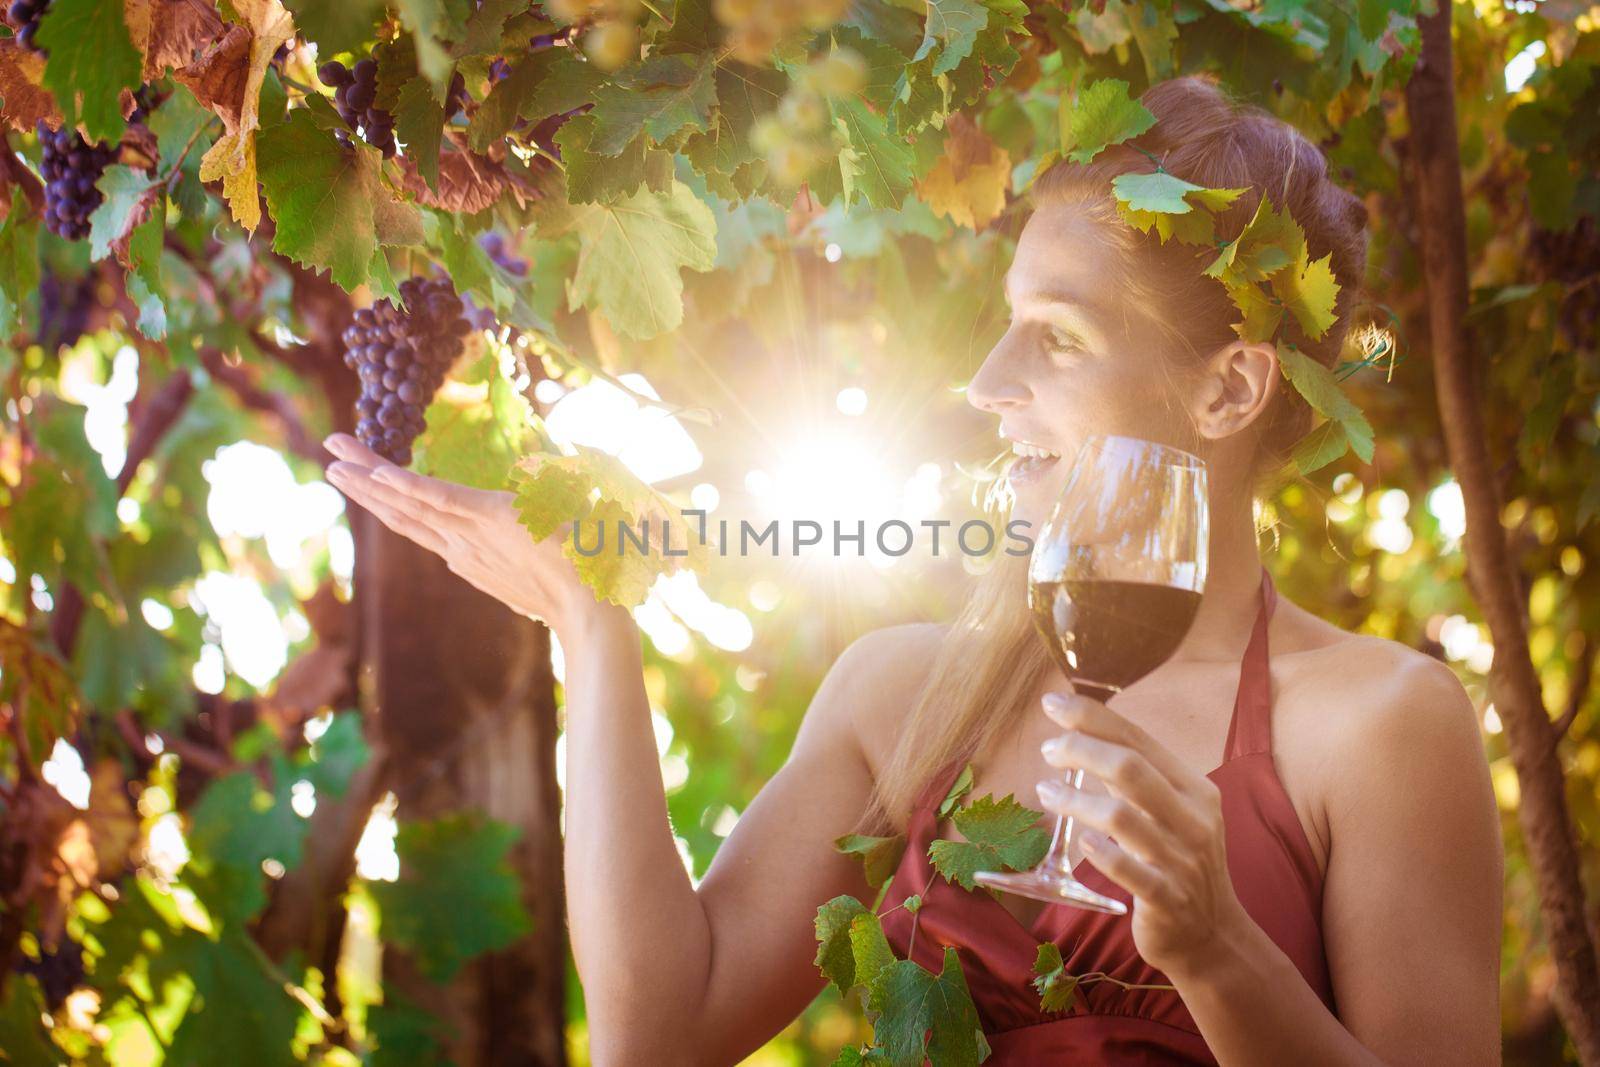 Wine queen visiting her vineyard with sun shining though the vines